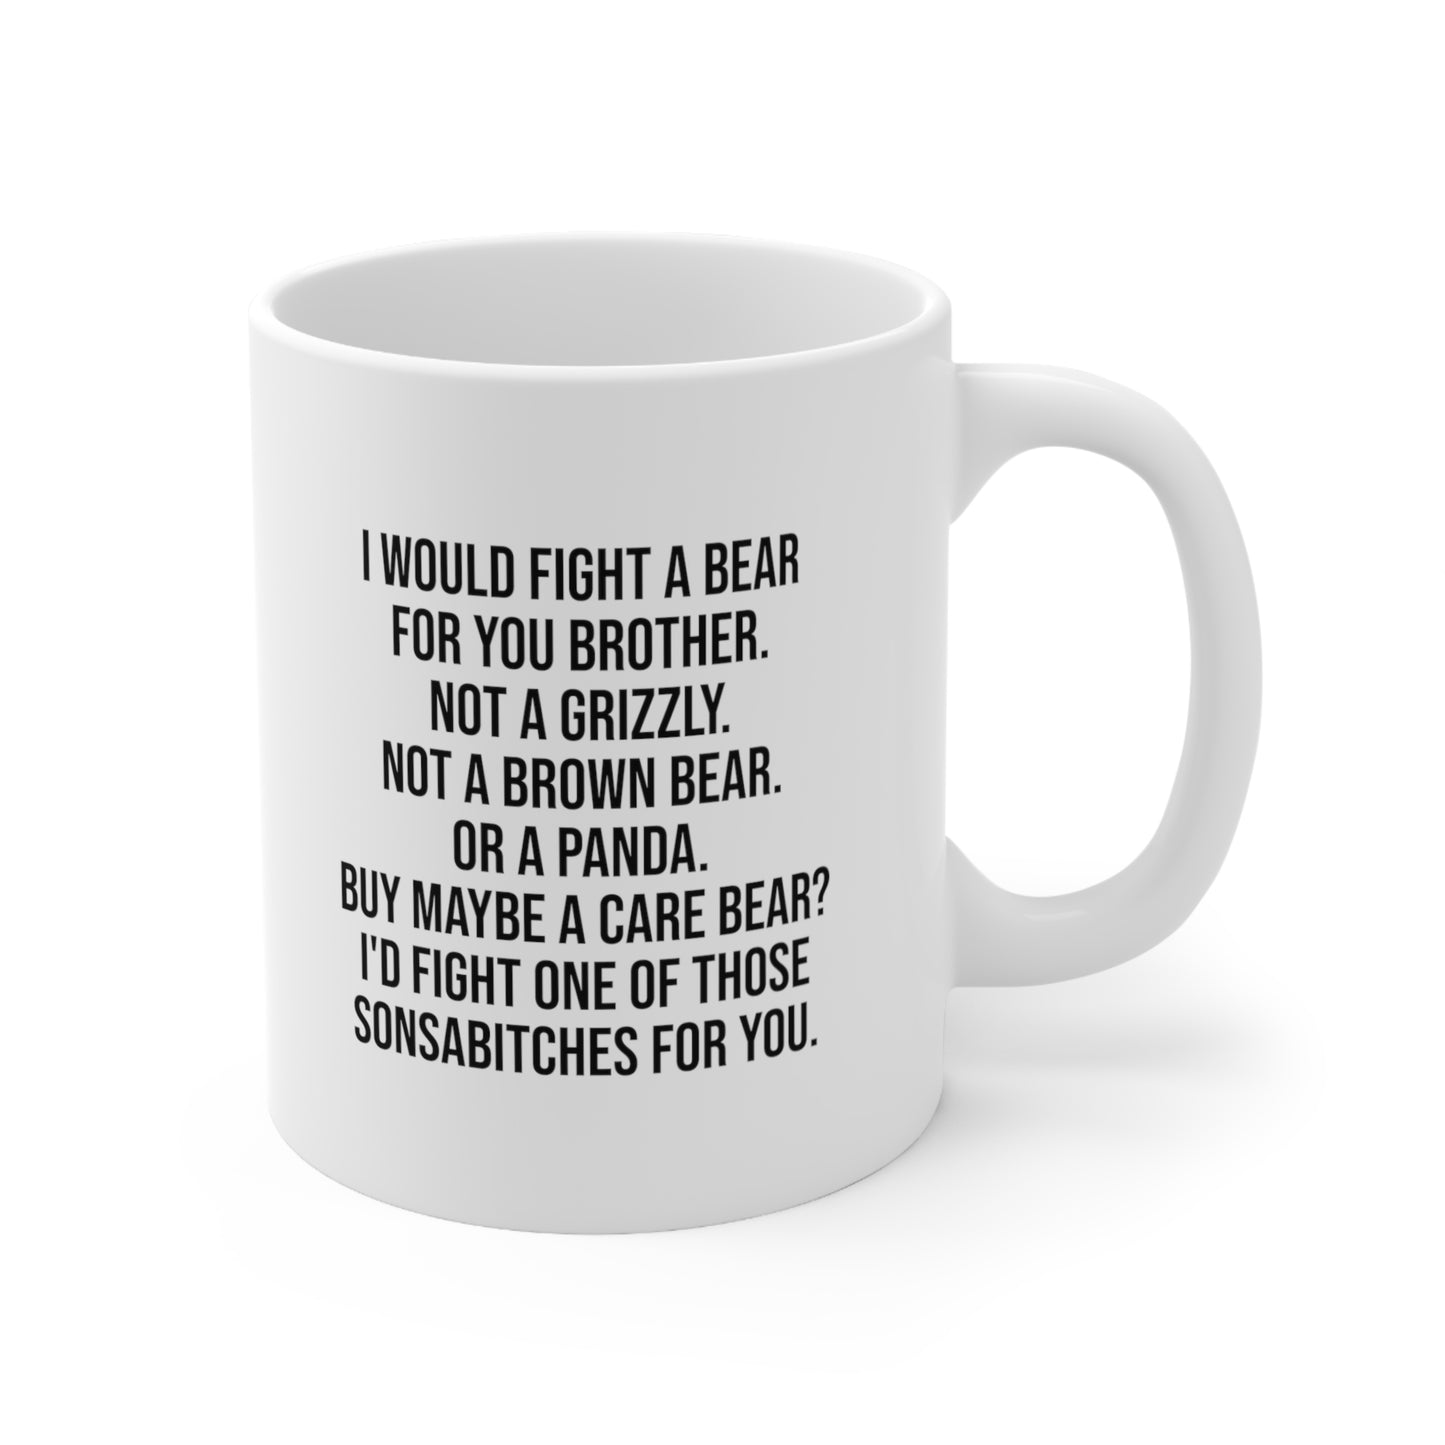 I would fight a bear for you brother Coffee Mug 11oz